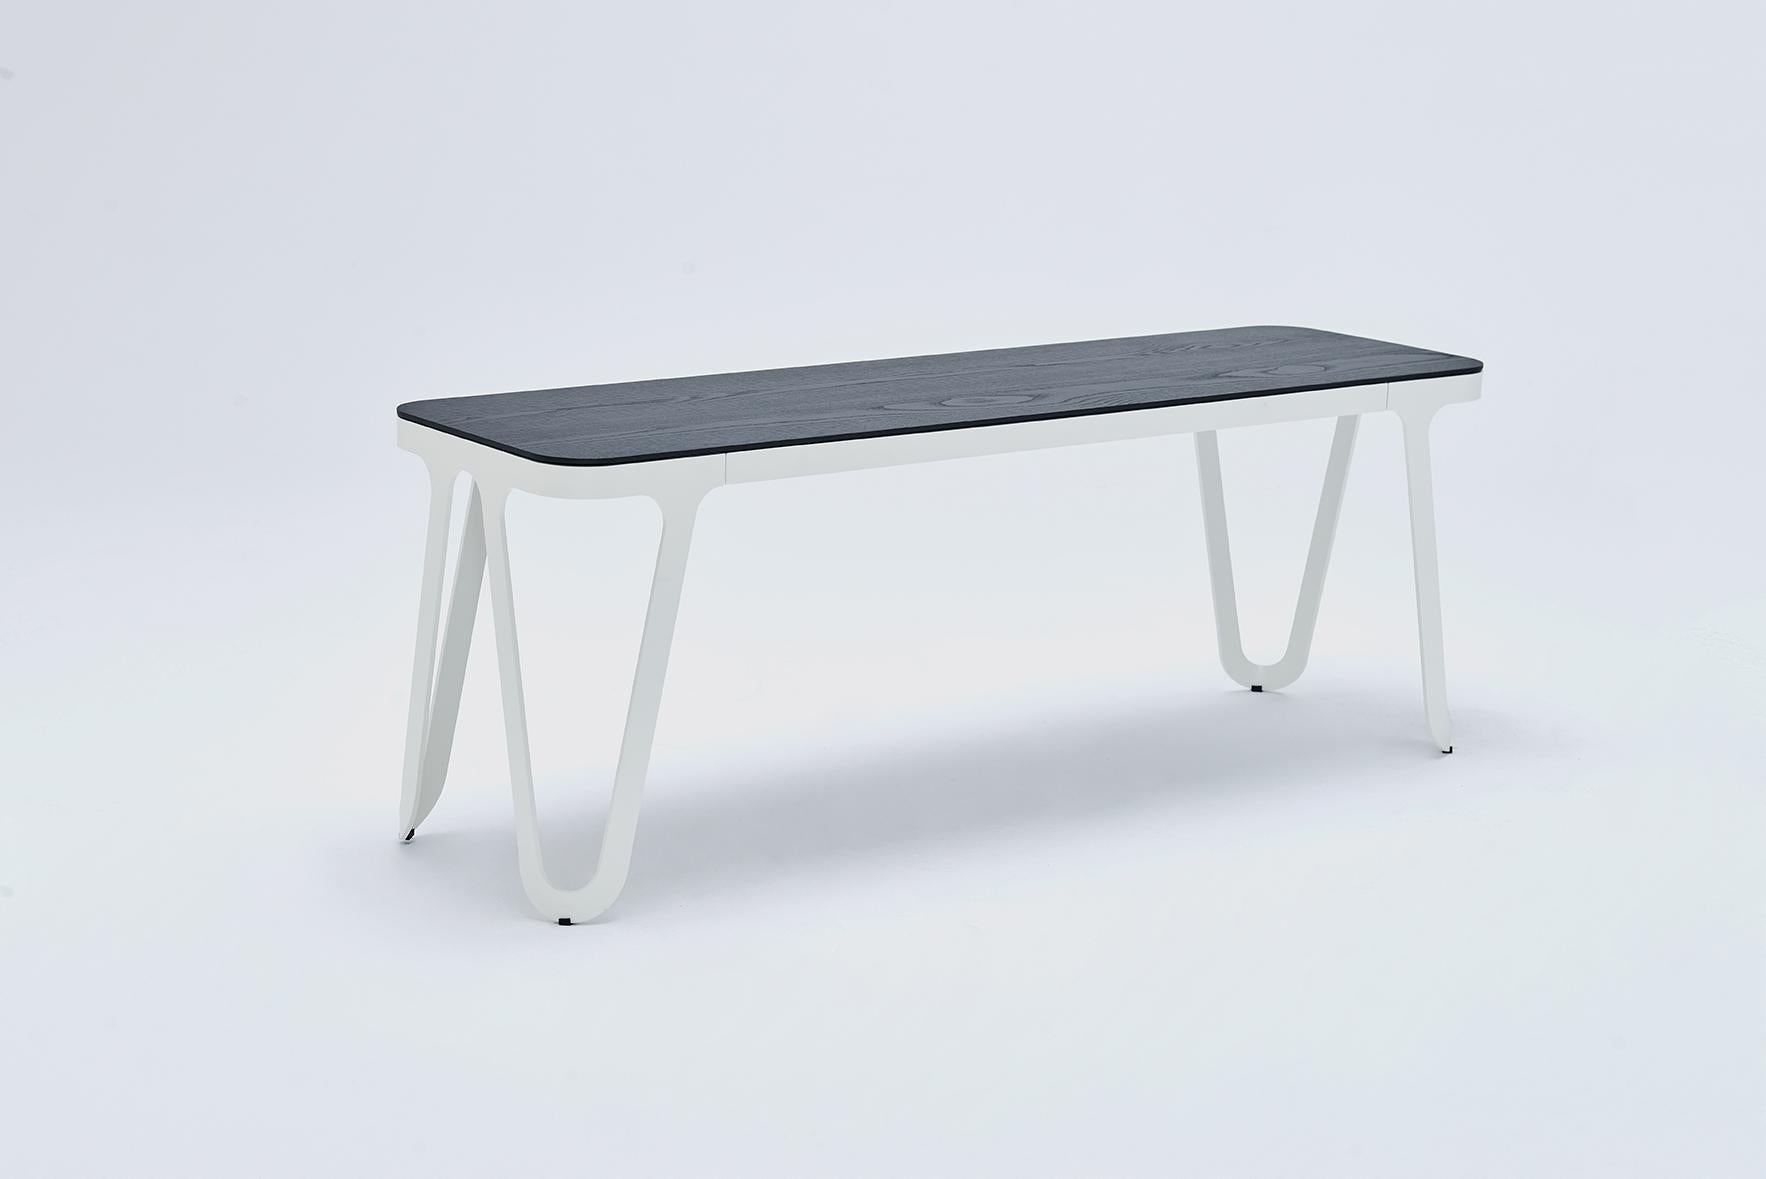 Loop Bench 120 Oak by Sebastian Scherer
Material: Aluminium, Oak
Dimensions: D120x W38 x H45 cm.
Weight: 16.4 kg
Also Available: Colours: solid wood (matt lacquered): black and white stained ash / natural oak / american walnut
frame (matt):